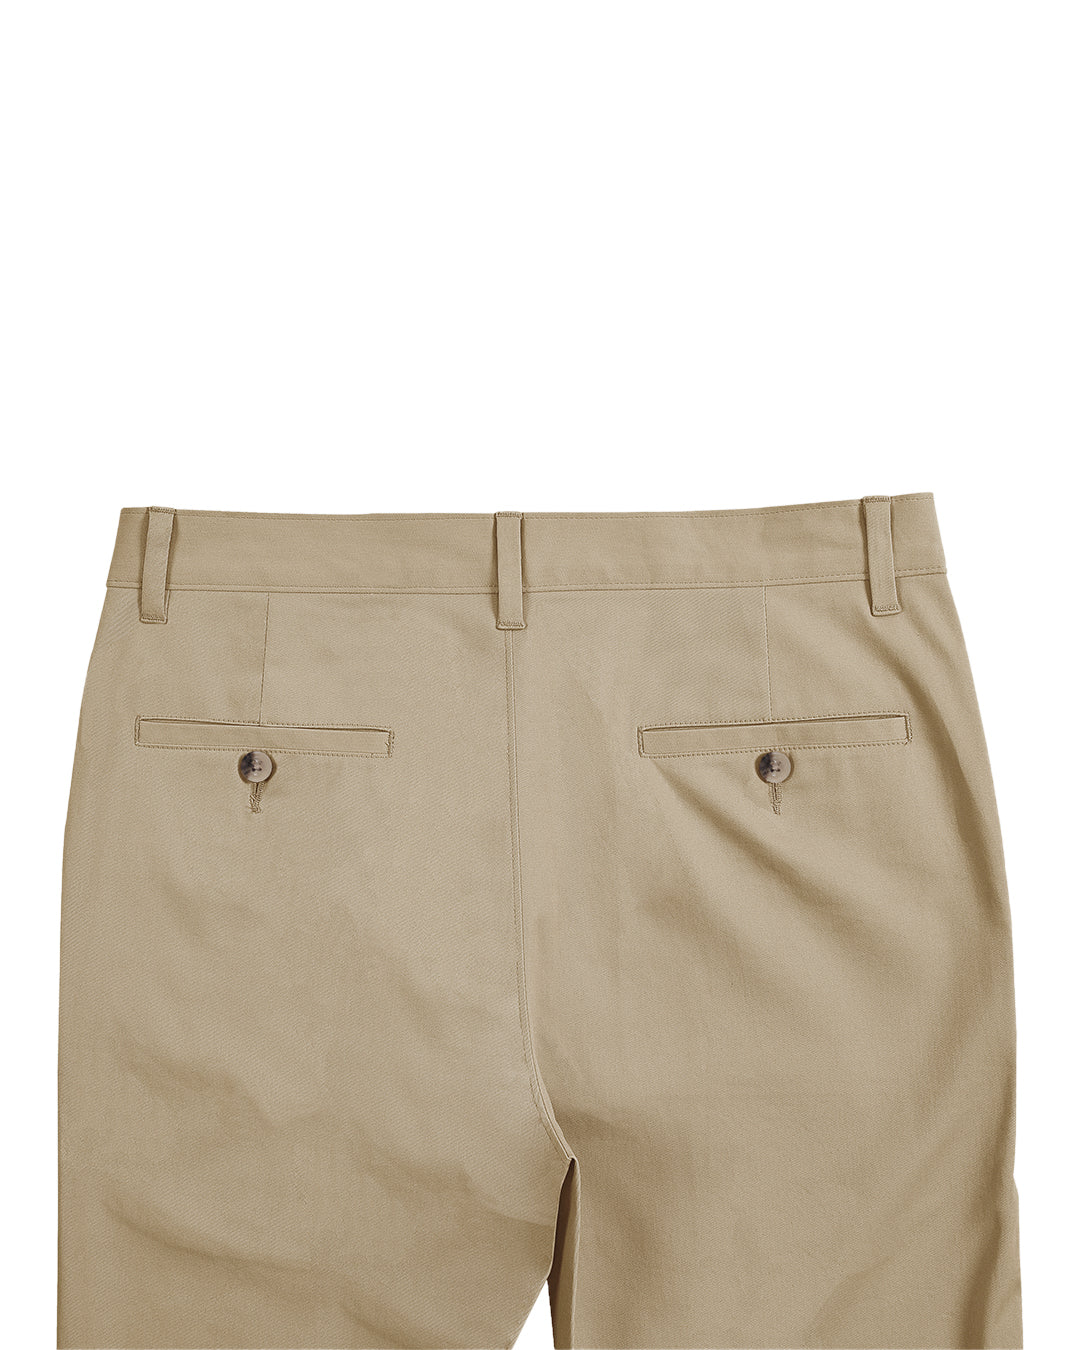 Back view of custom Genoa Chino pants for men by Luxire in British khaki